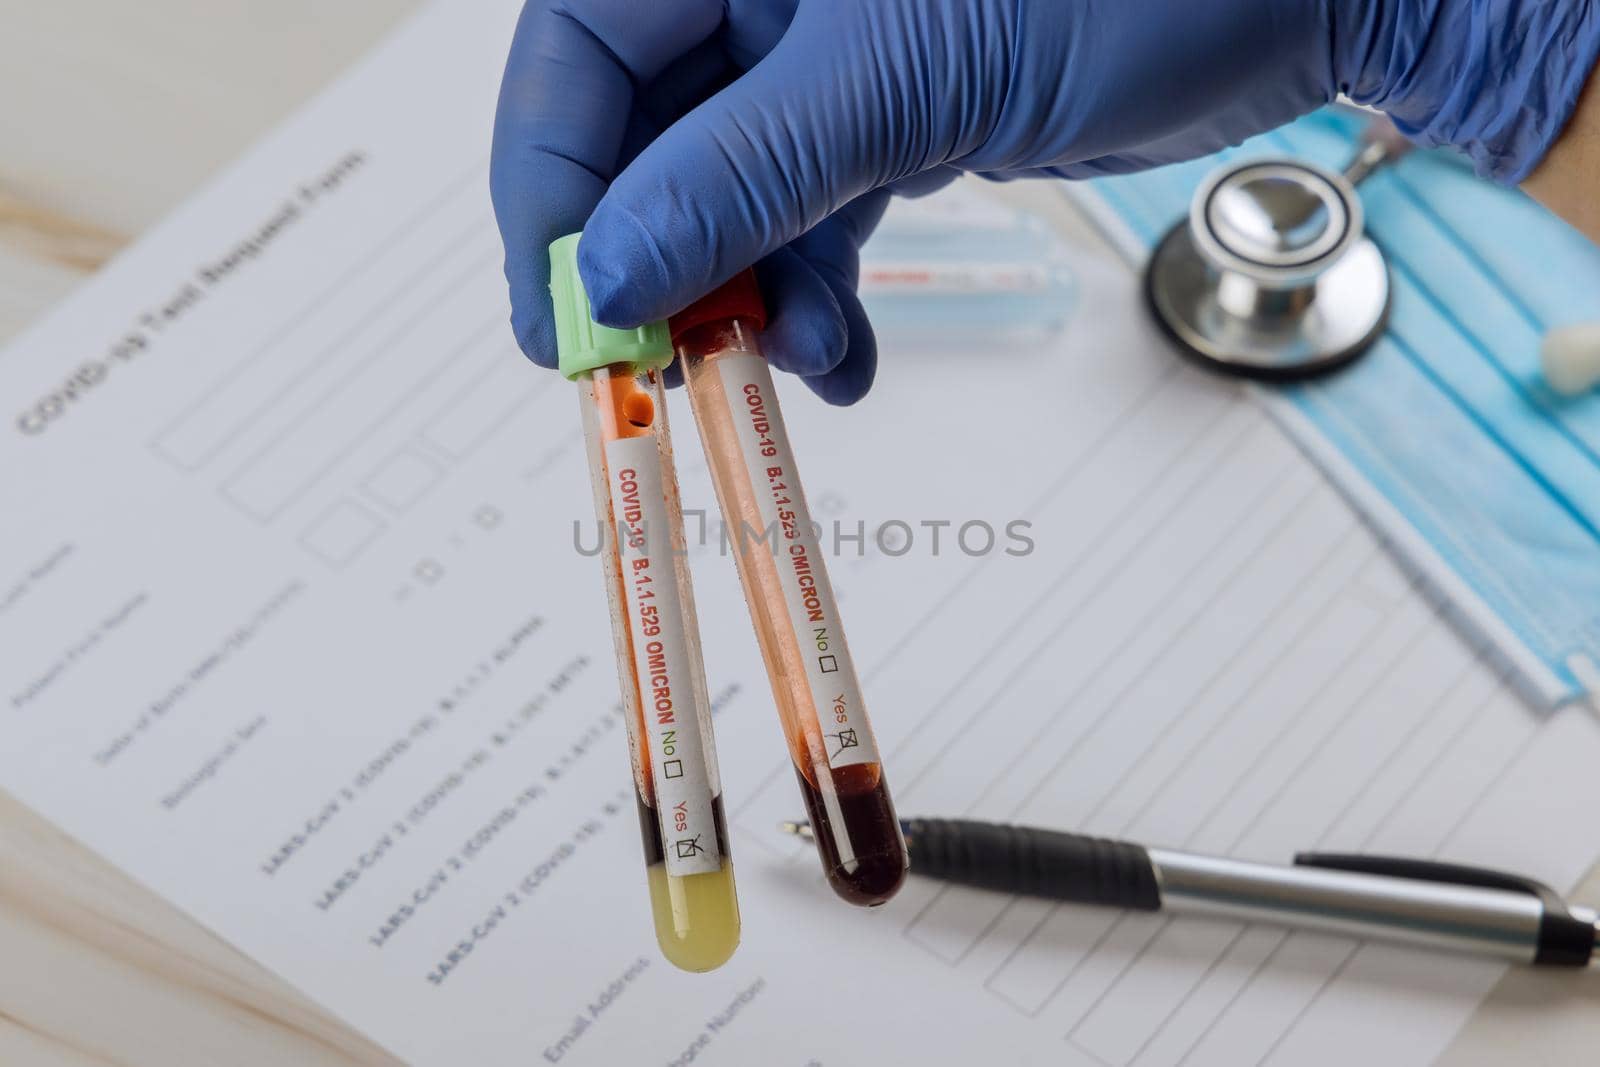 Coronavirus infected blood test sample in doctor hands. COVID-19 of new version Omicron B.1.1.529 epidemic virus outbreak by ungvar